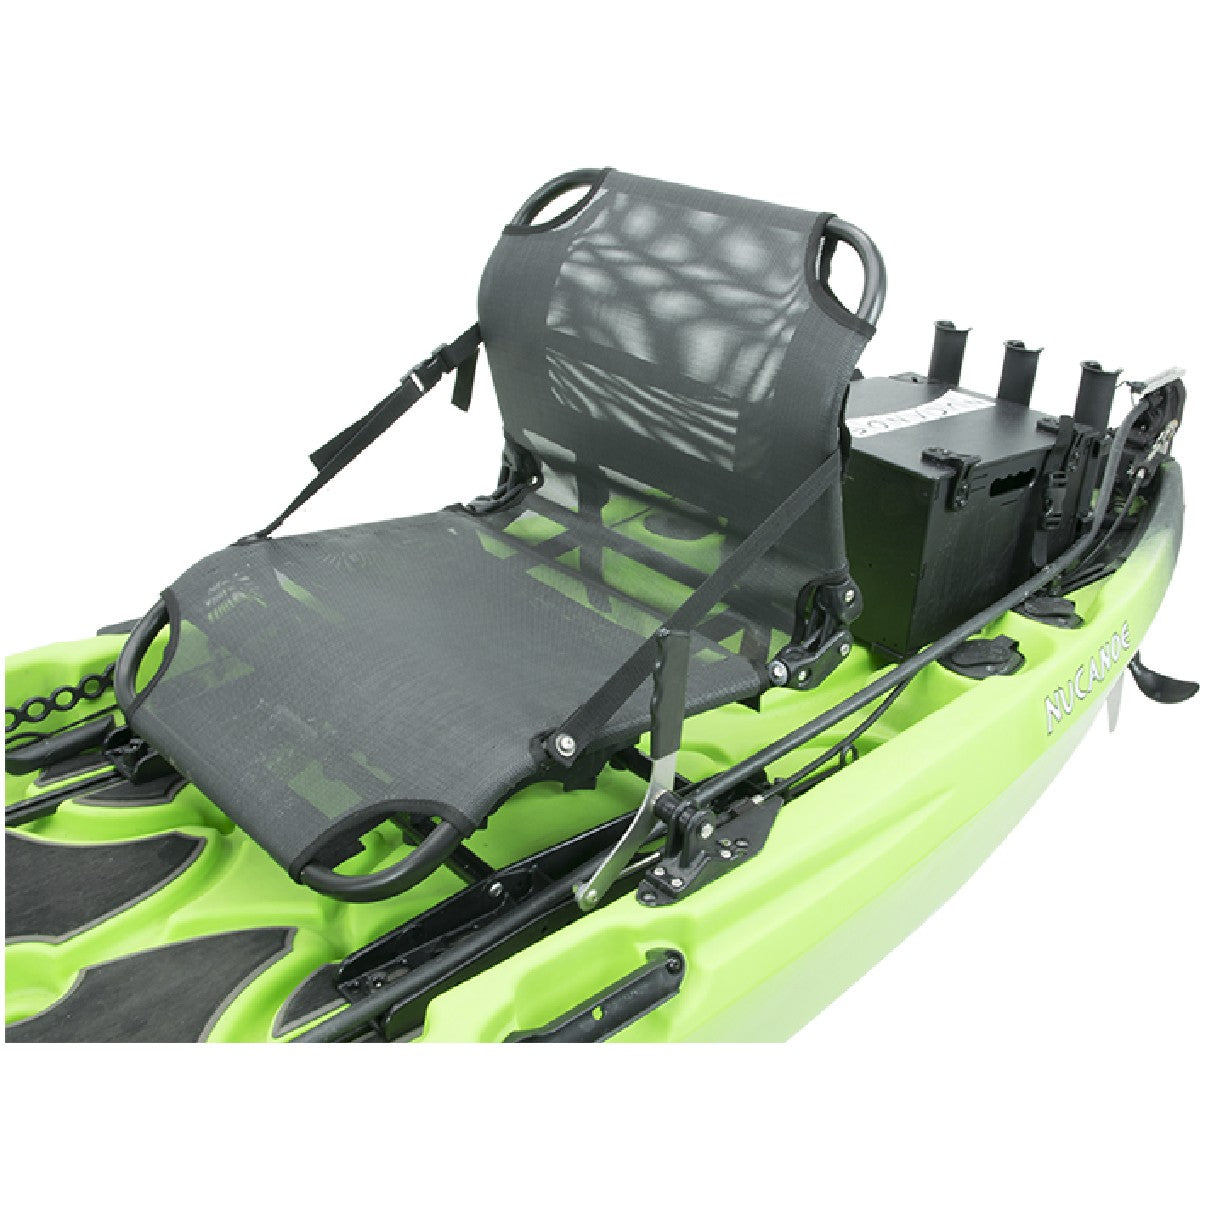 Foot Pedal System Fishing Kayak 13ft Kayak with Pedals Pick Up At